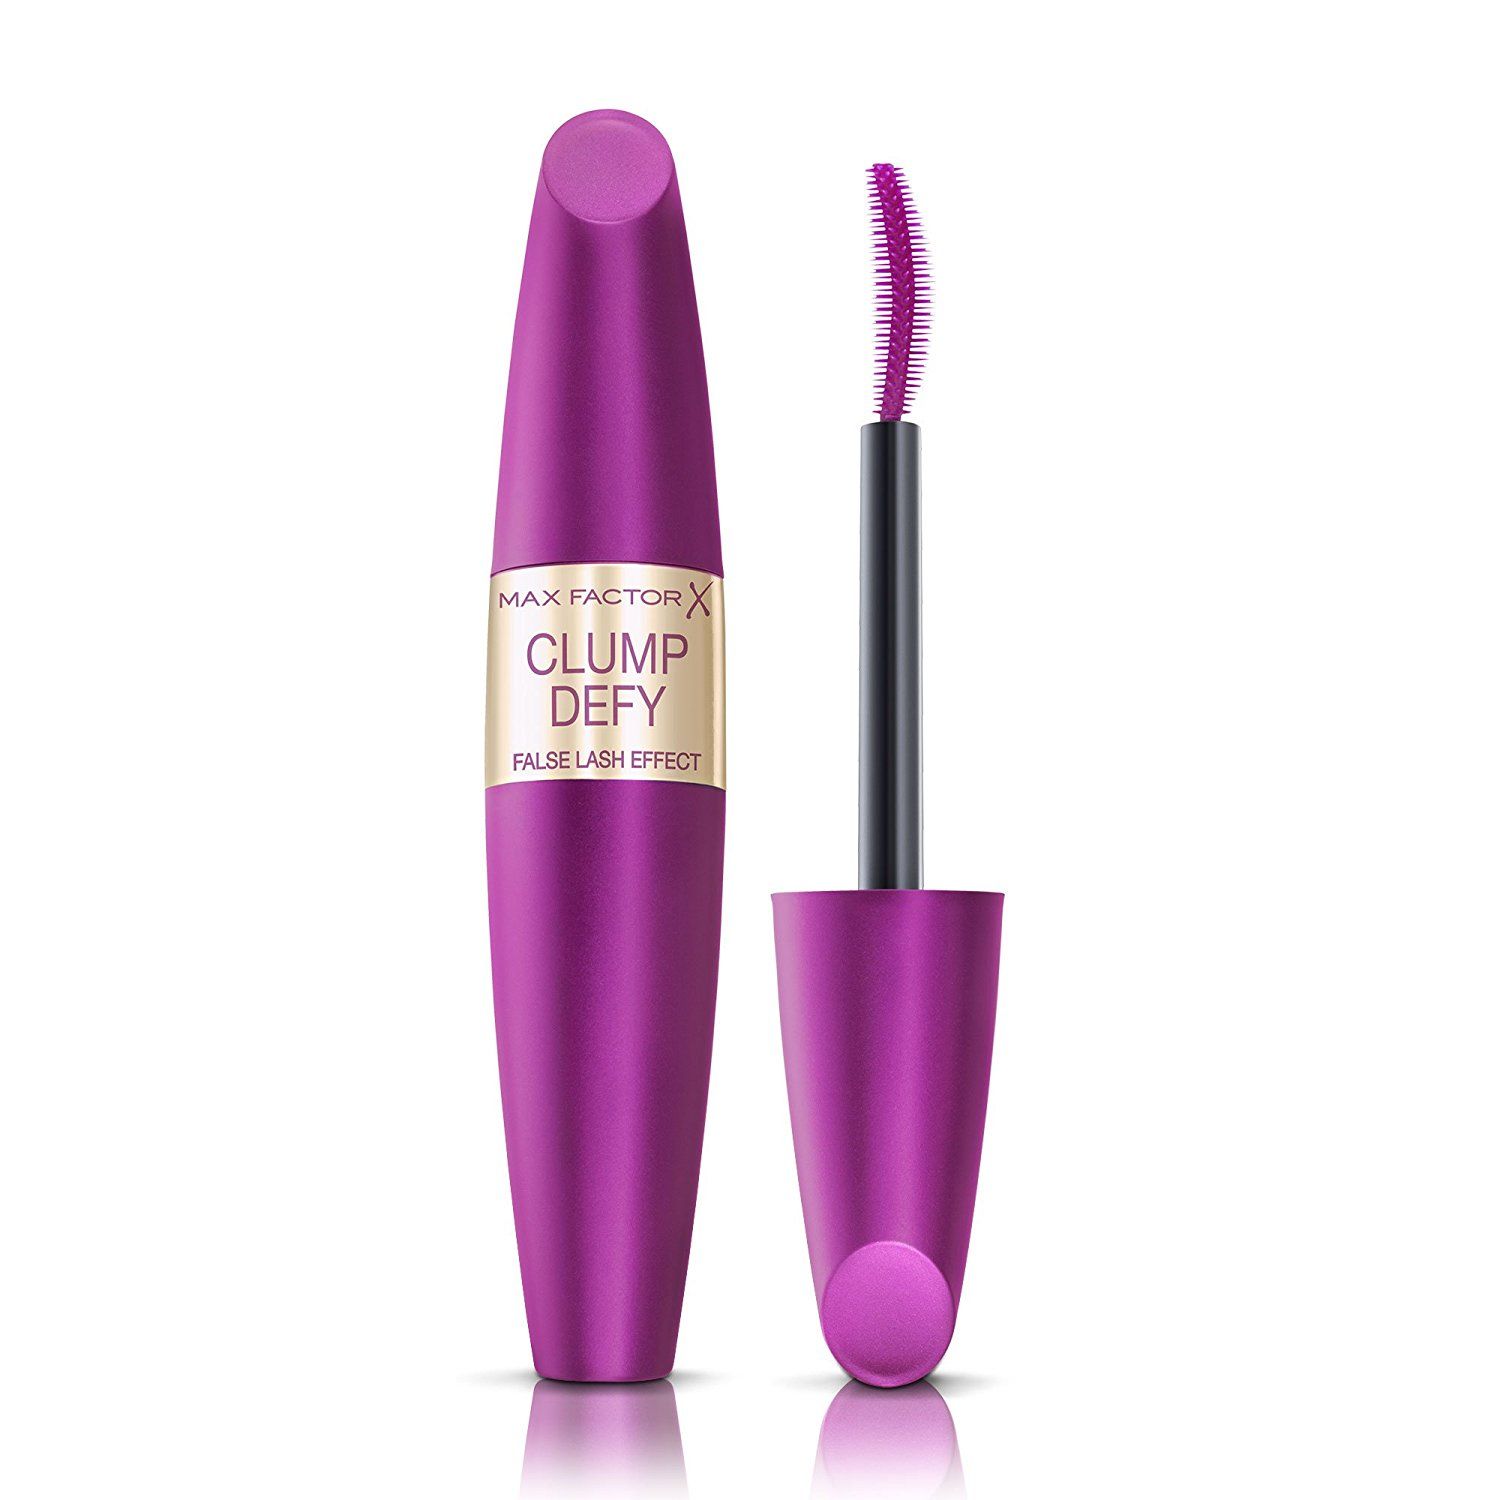 Max Factor Clump Defy Volumising Mascara gives super volume, stroke after stroke and beautifully separated and defined lashes, without clumping. No need to compromise, you can now have it all. Please note these are supplied to us in sealed three packs. They are not individually sealed, however, are brand new and unused.